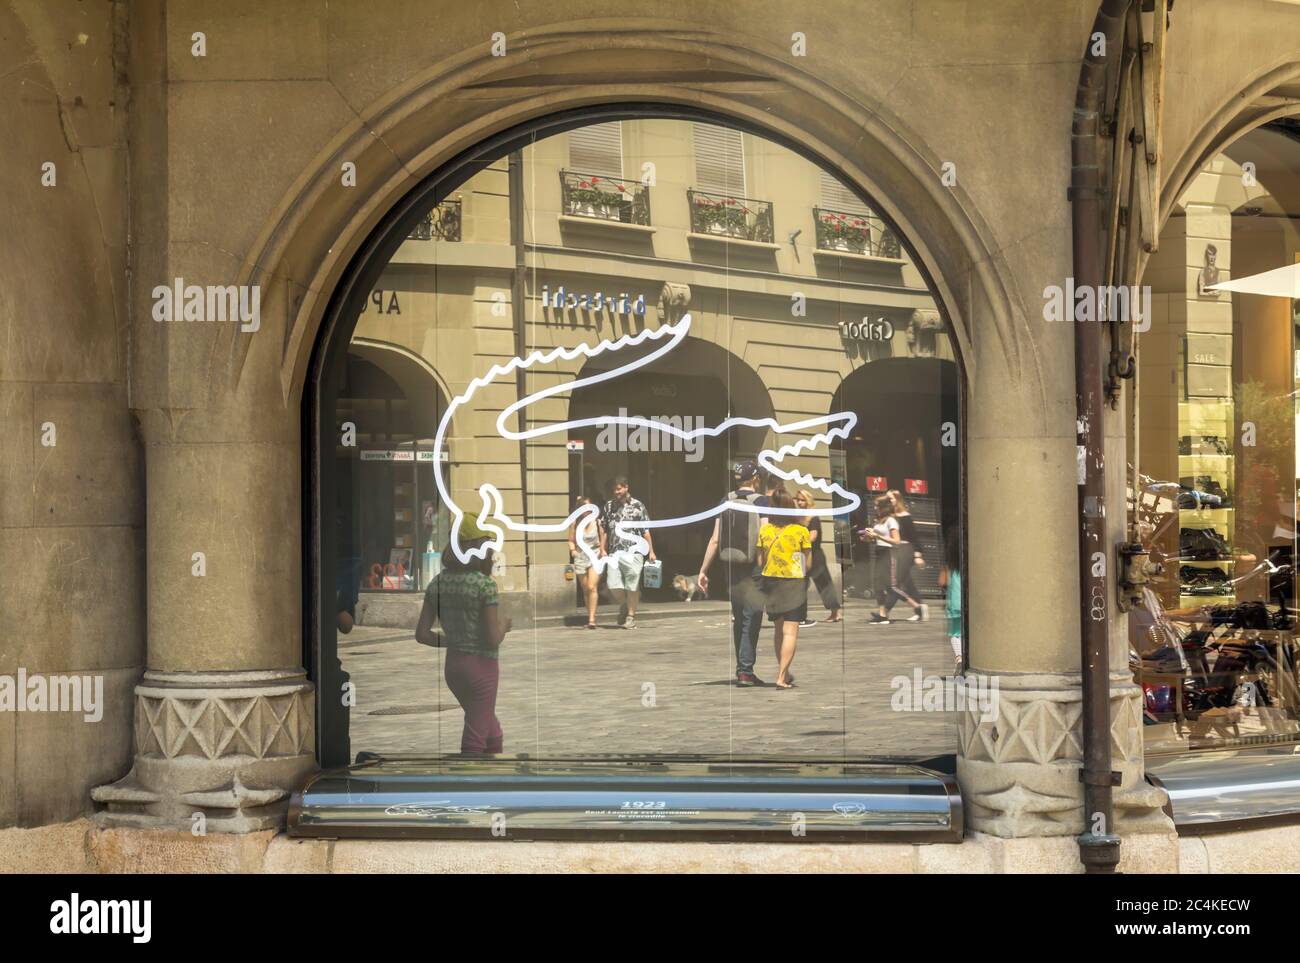 Bern, Switzerland, July 2, 2019 - Lacoste shop. Lacoste is a French clothing company, founded in 1933 by tennis player René Lacoste and André Gillier. Stock Photo